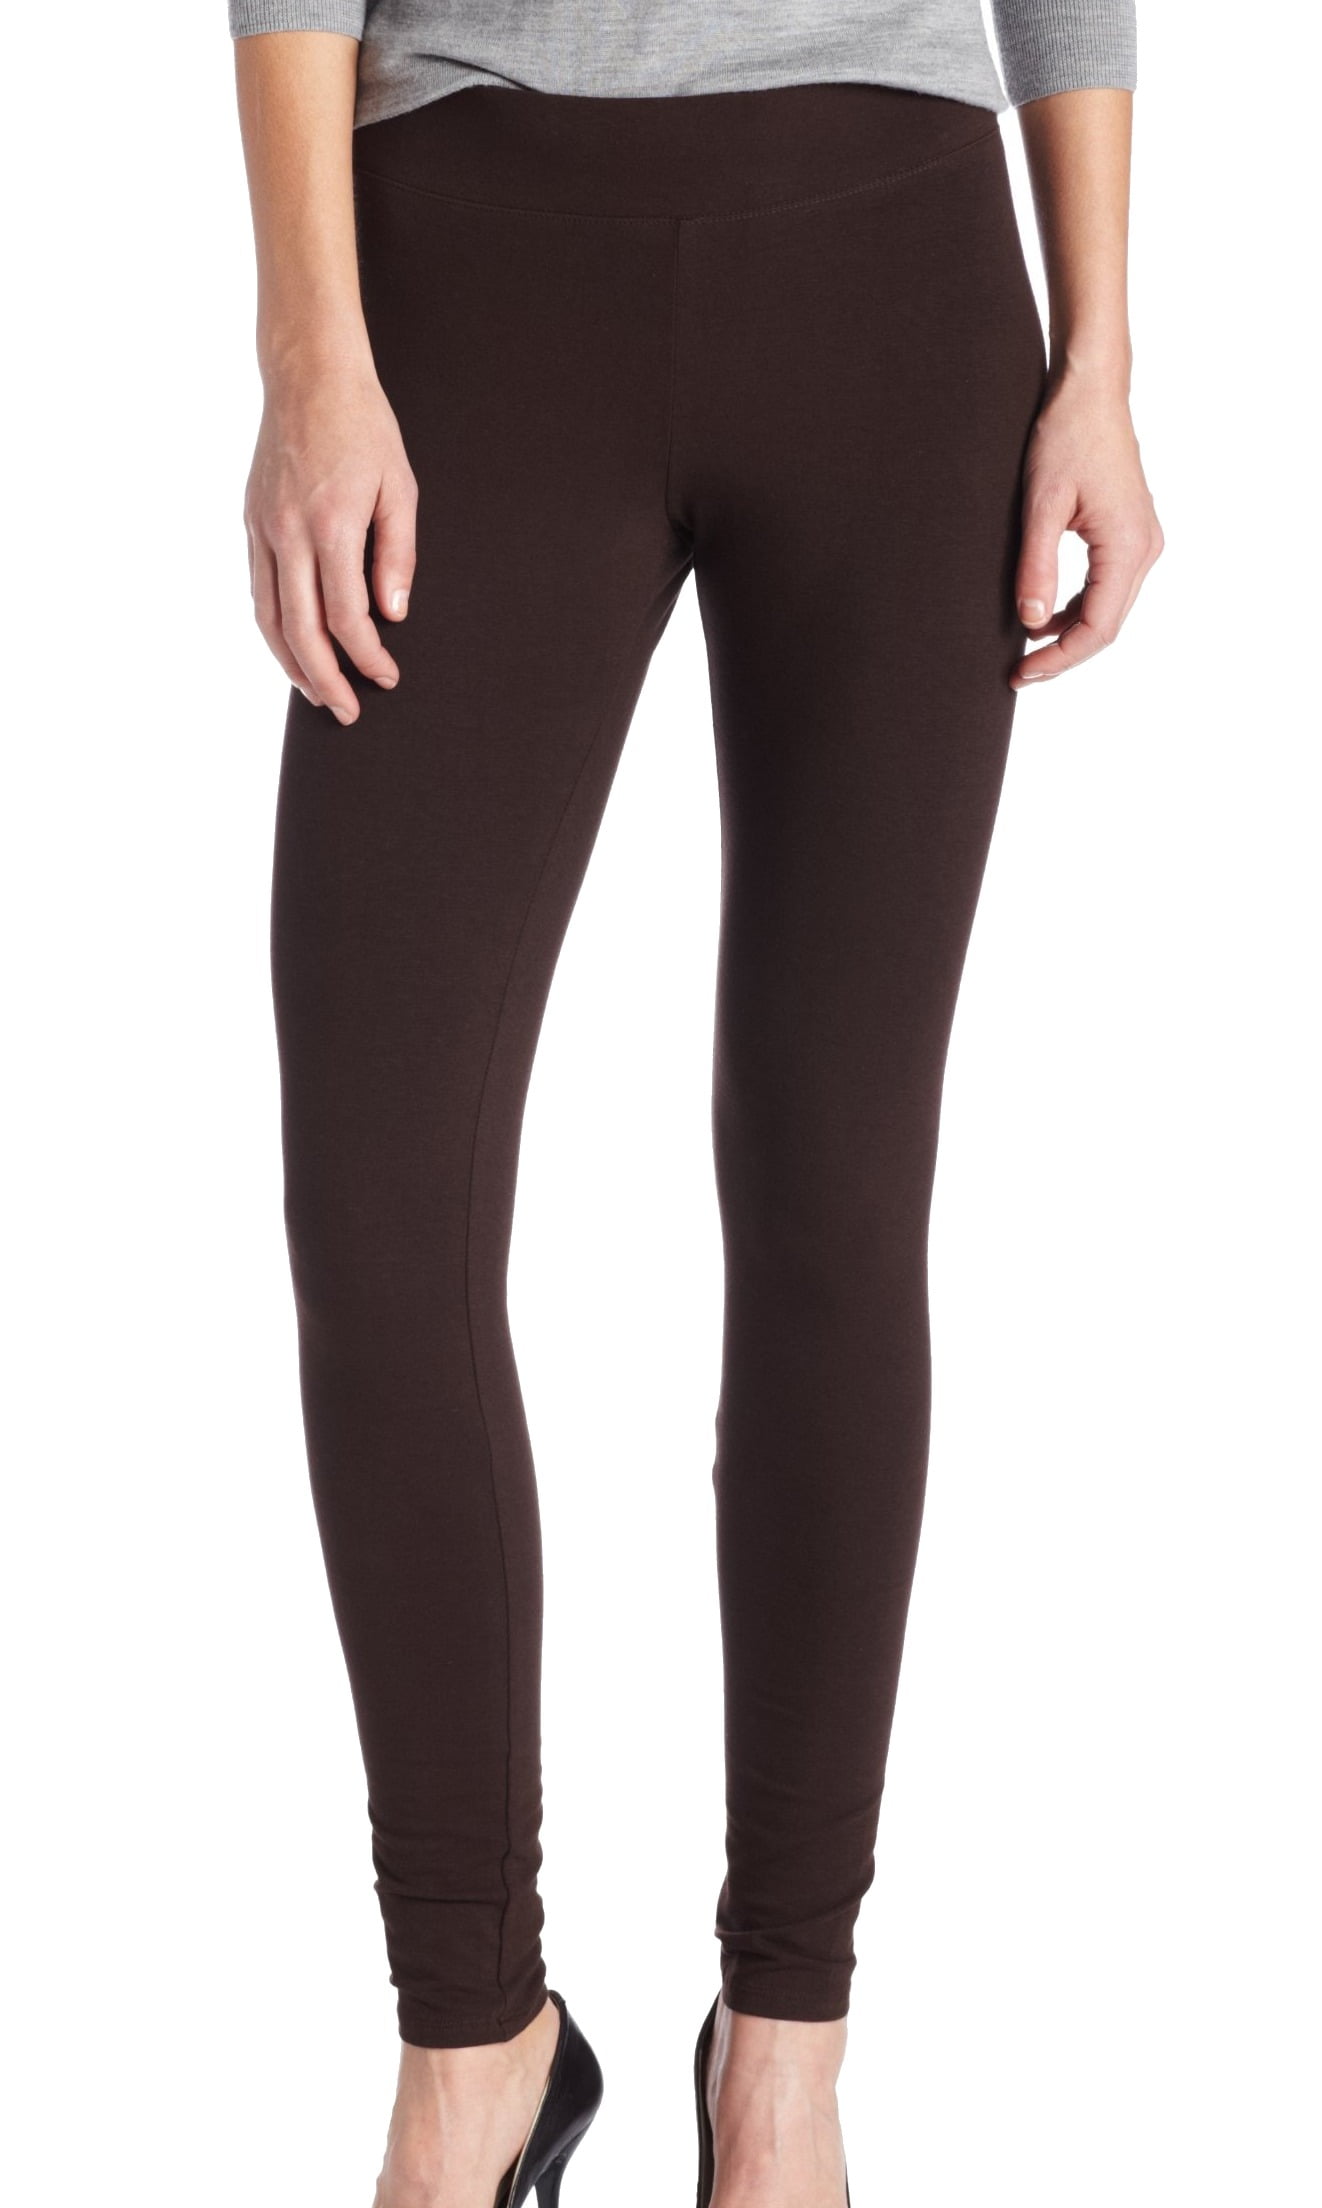 Hue - Hue NEW Brown Fawn Womens Size Small S Stretch Skinny Legging ...